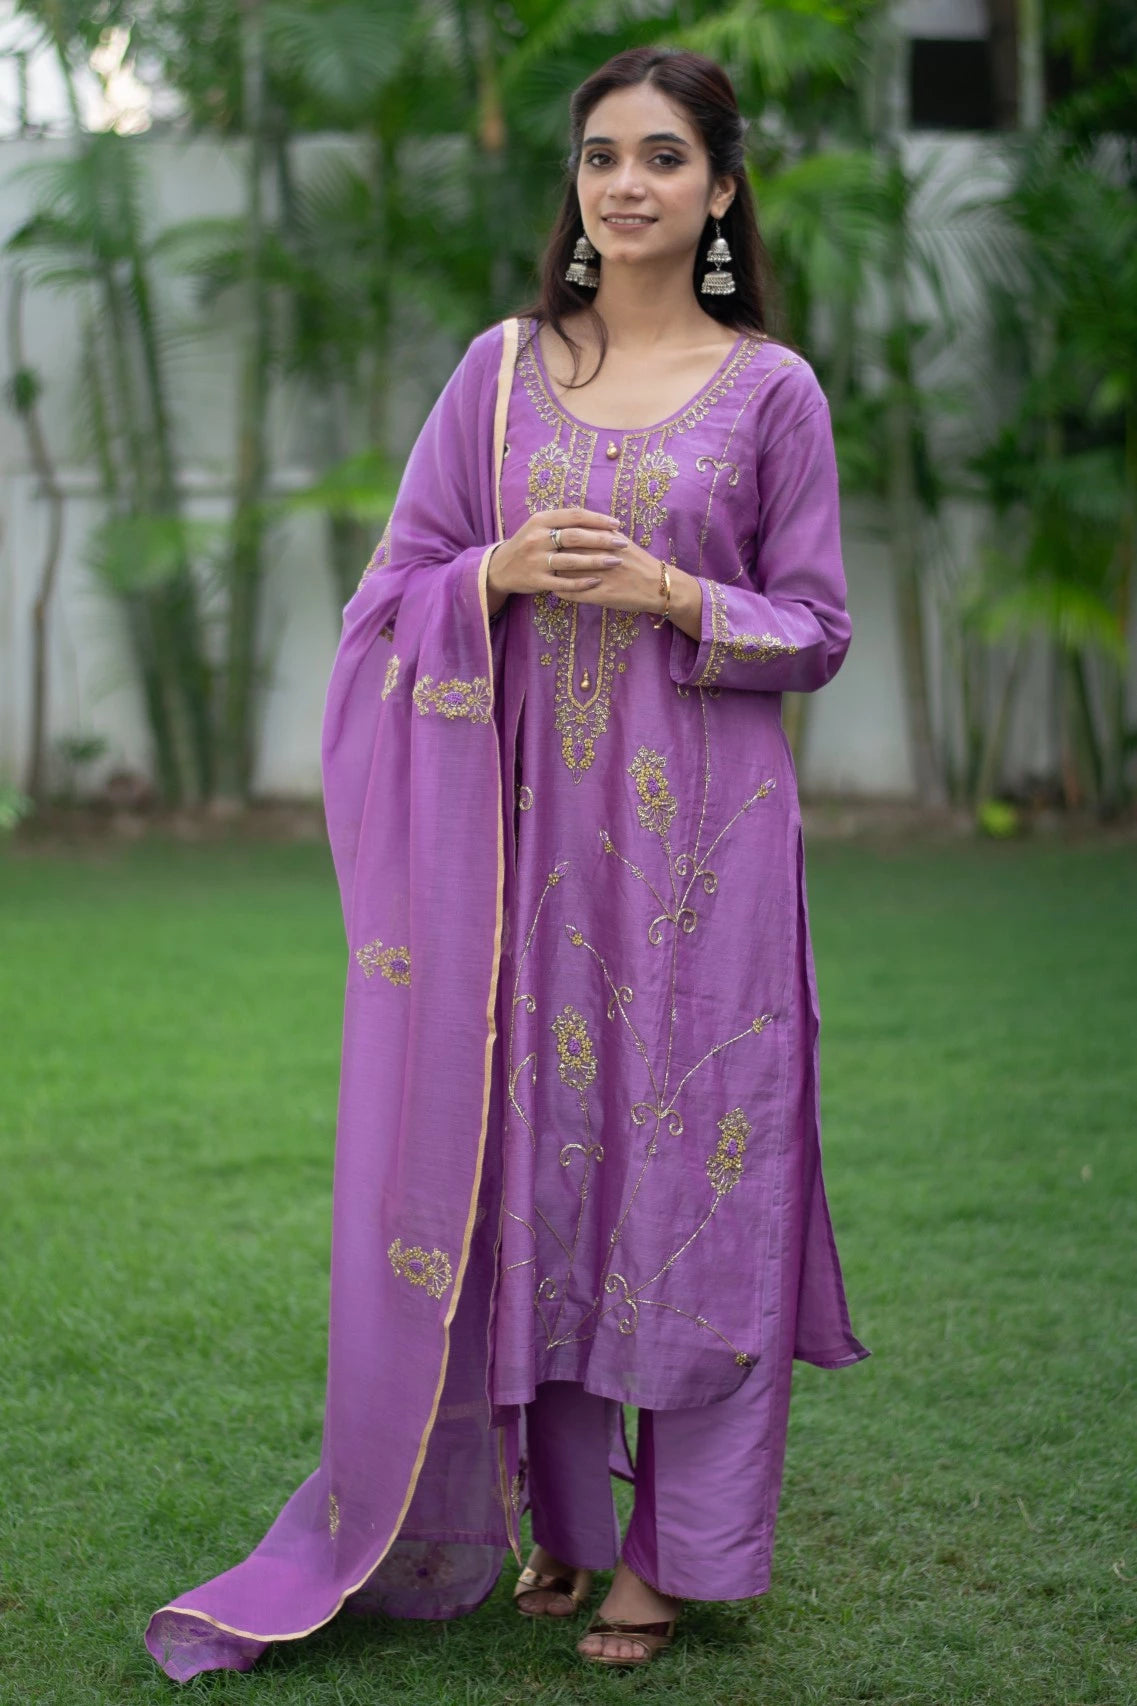 This image depicts a woman dressed in a vibrant purple lilac kurta with loose-fitting trousers.